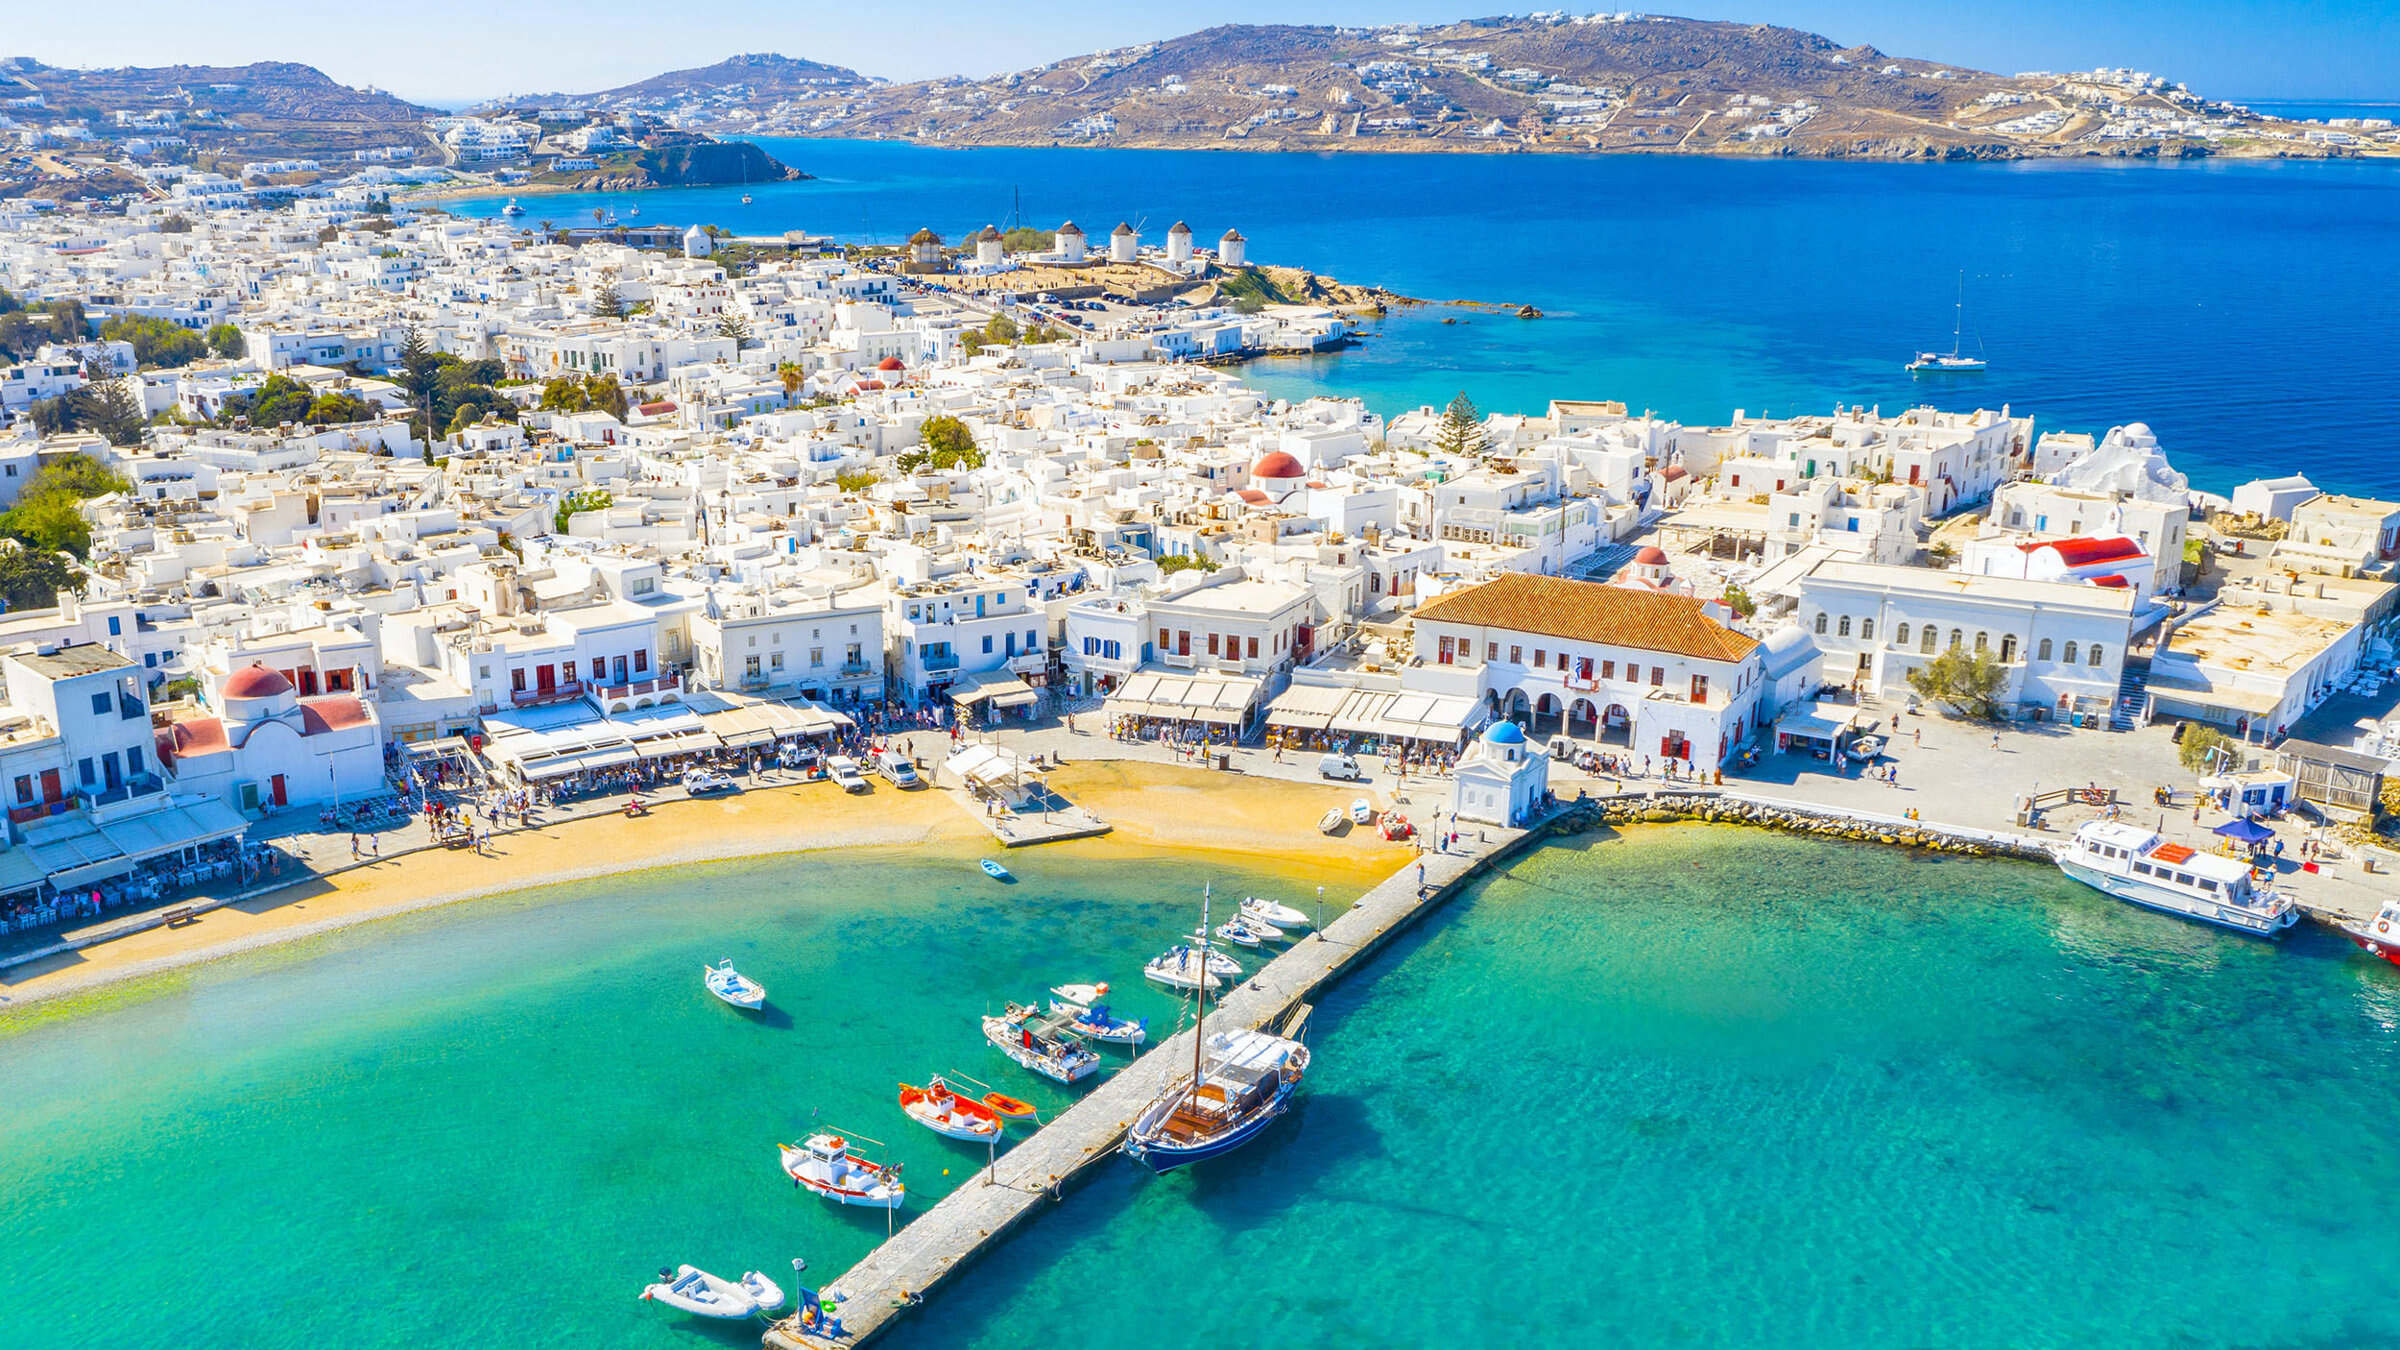 Food and Drink in Mykonos